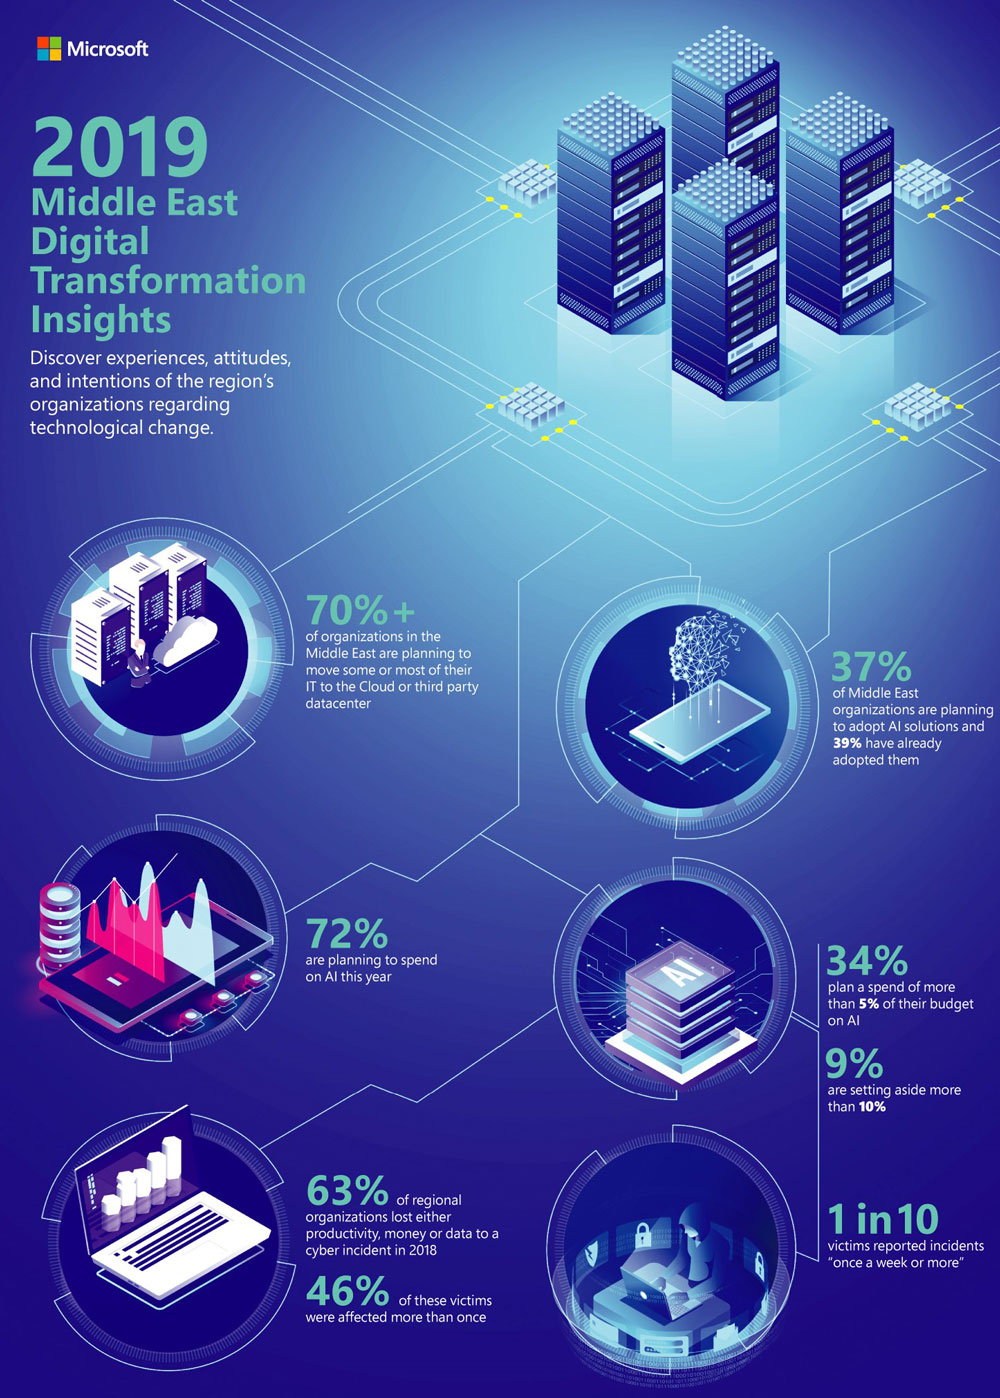 Infographic on Digital Transformation insight for 2019